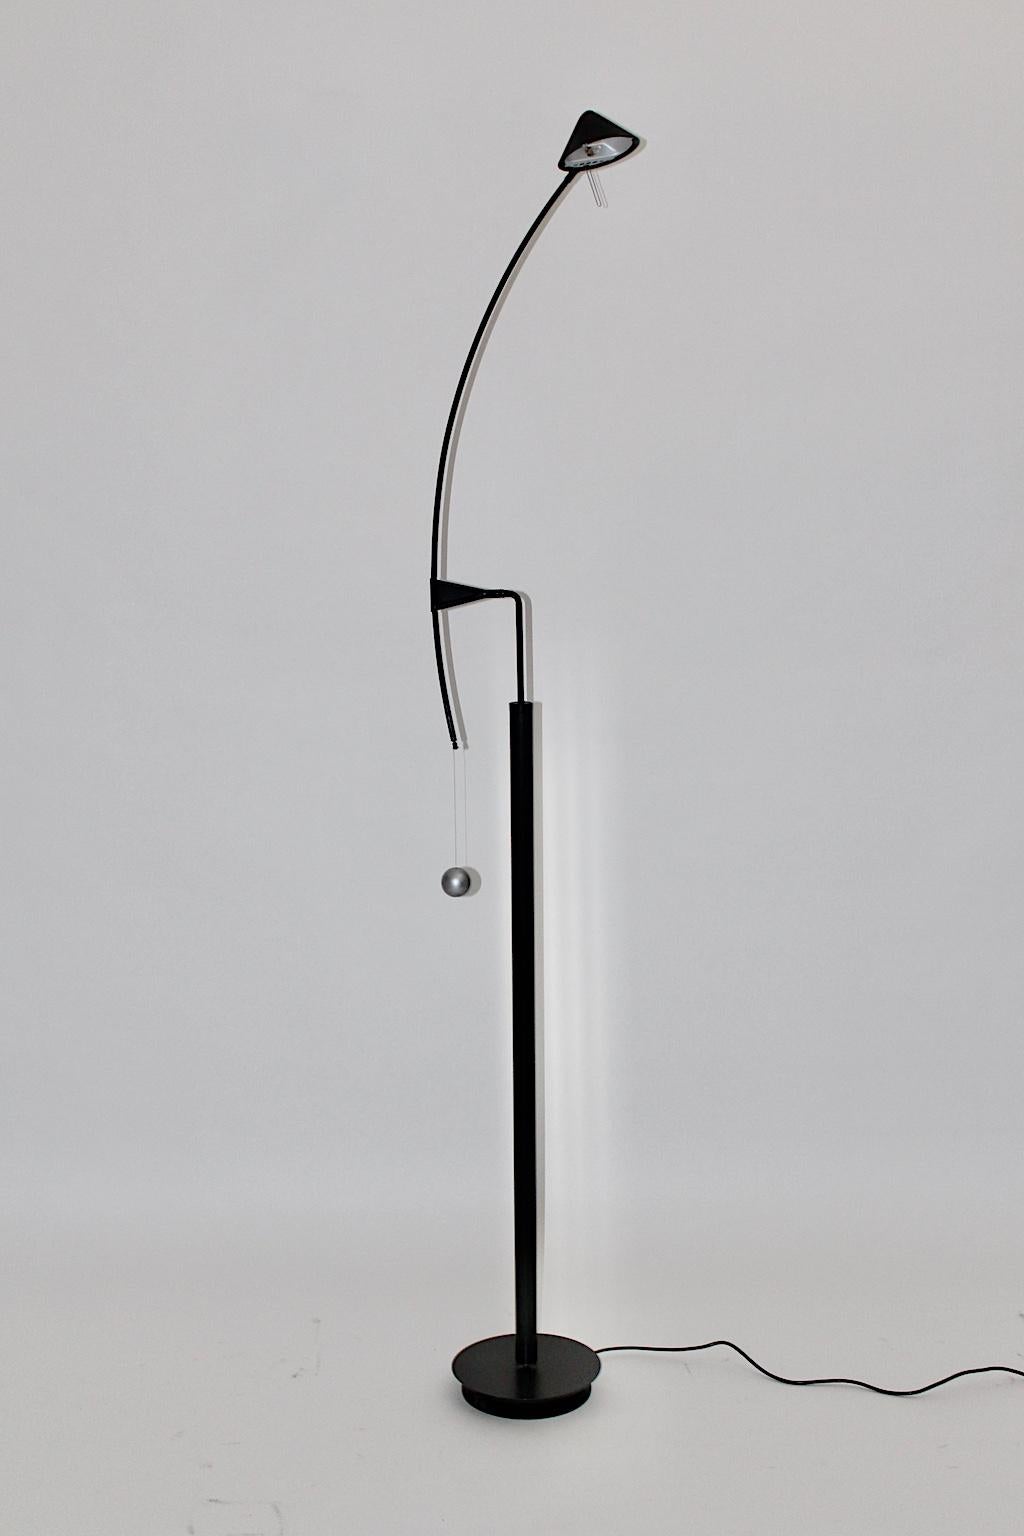 Postmodern Vintage Black Floor Lamp by Carlo Forcolini 1989 for Artemide Italy For Sale 9